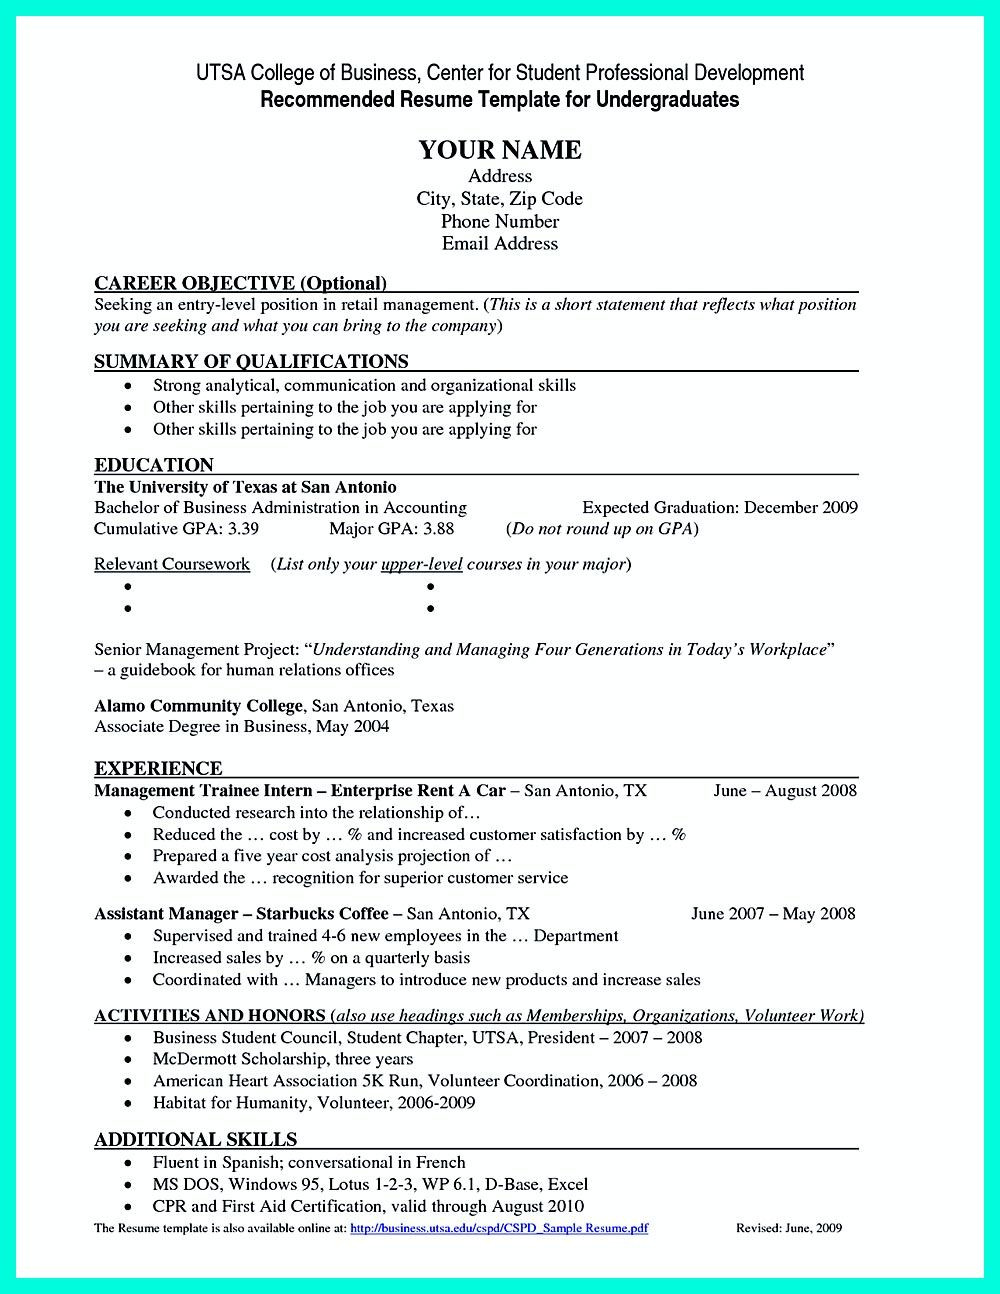 Resume Templates for Graduating College Students Best Current College Student Resume with No Experience Job …